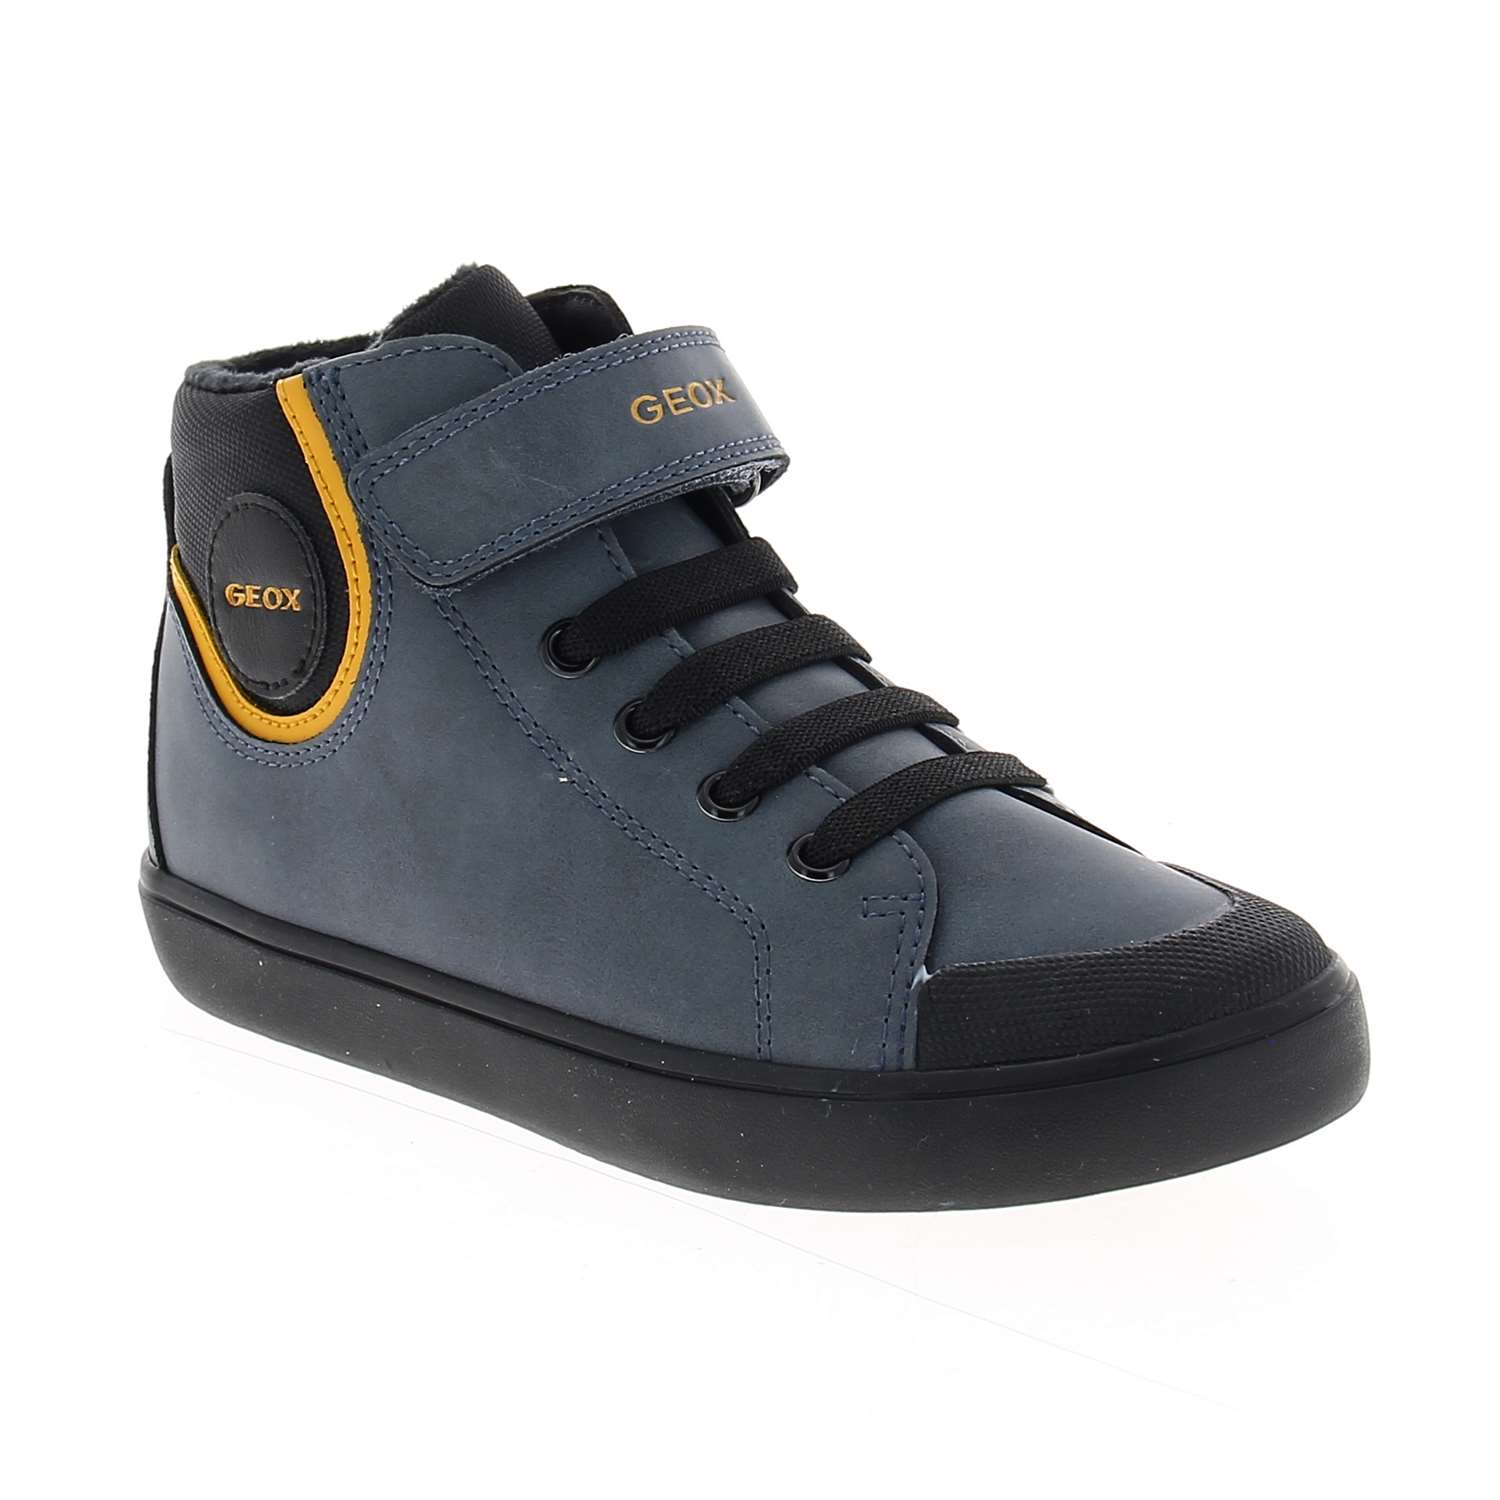 01 - GISLI BOY - GEOX - Chaussures montantes - Synthétique